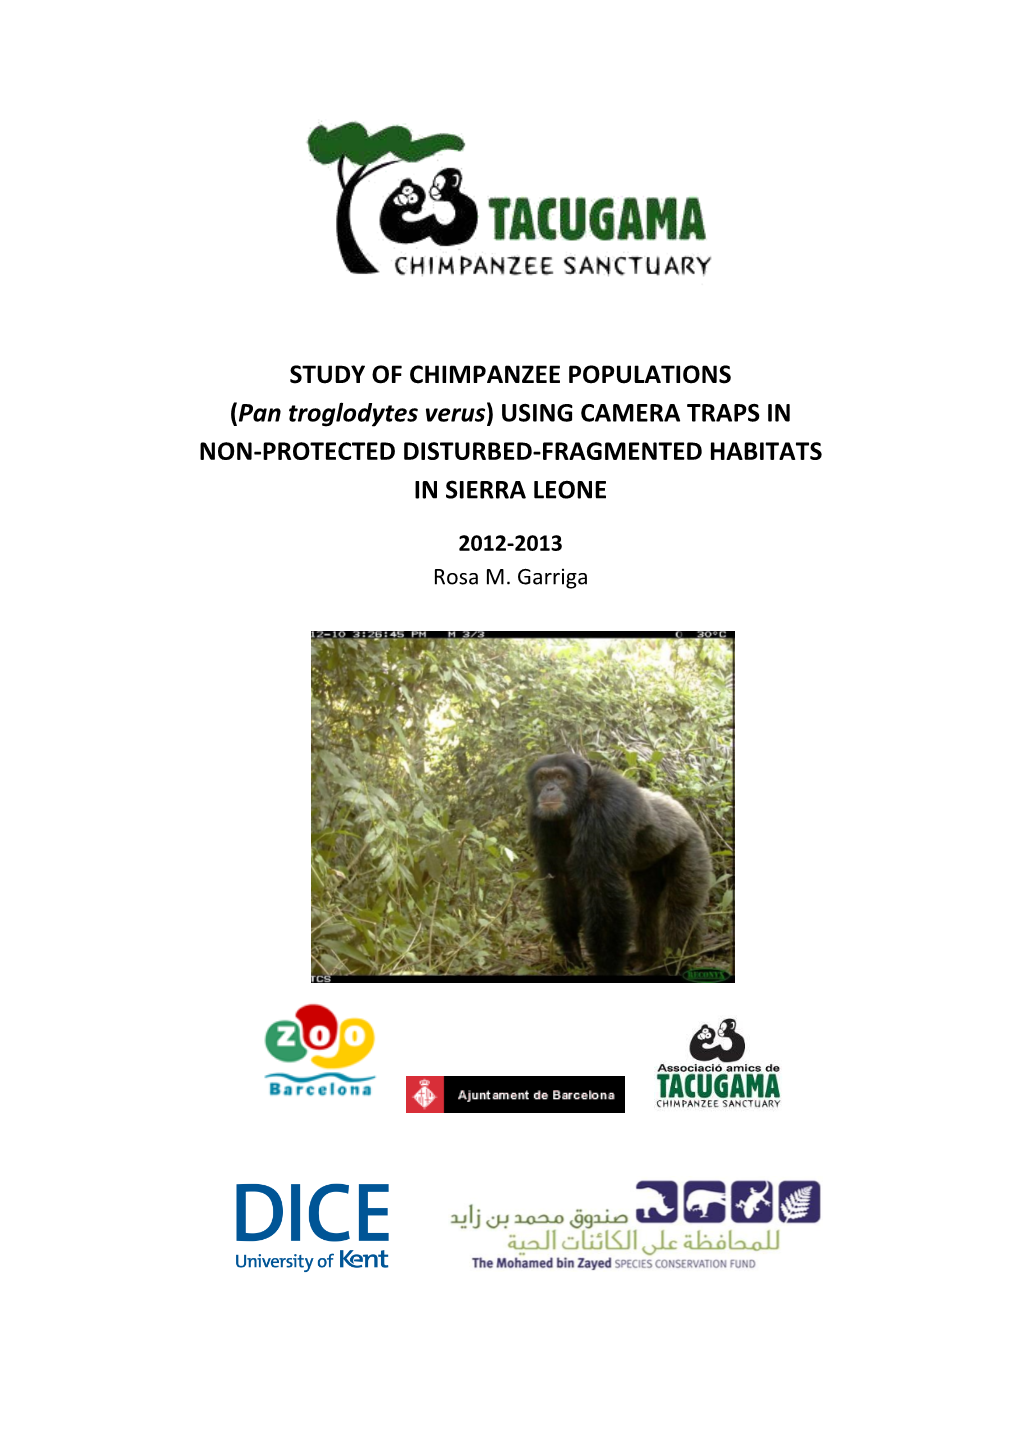 STUDY of CHIMPANZEE POPULATIONS (Pan Troglodytes Verus) USING CAMERA TRAPS in NON-PROTECTED DISTURBED-FRAGMENTED HABITATS in SIERRA LEONE